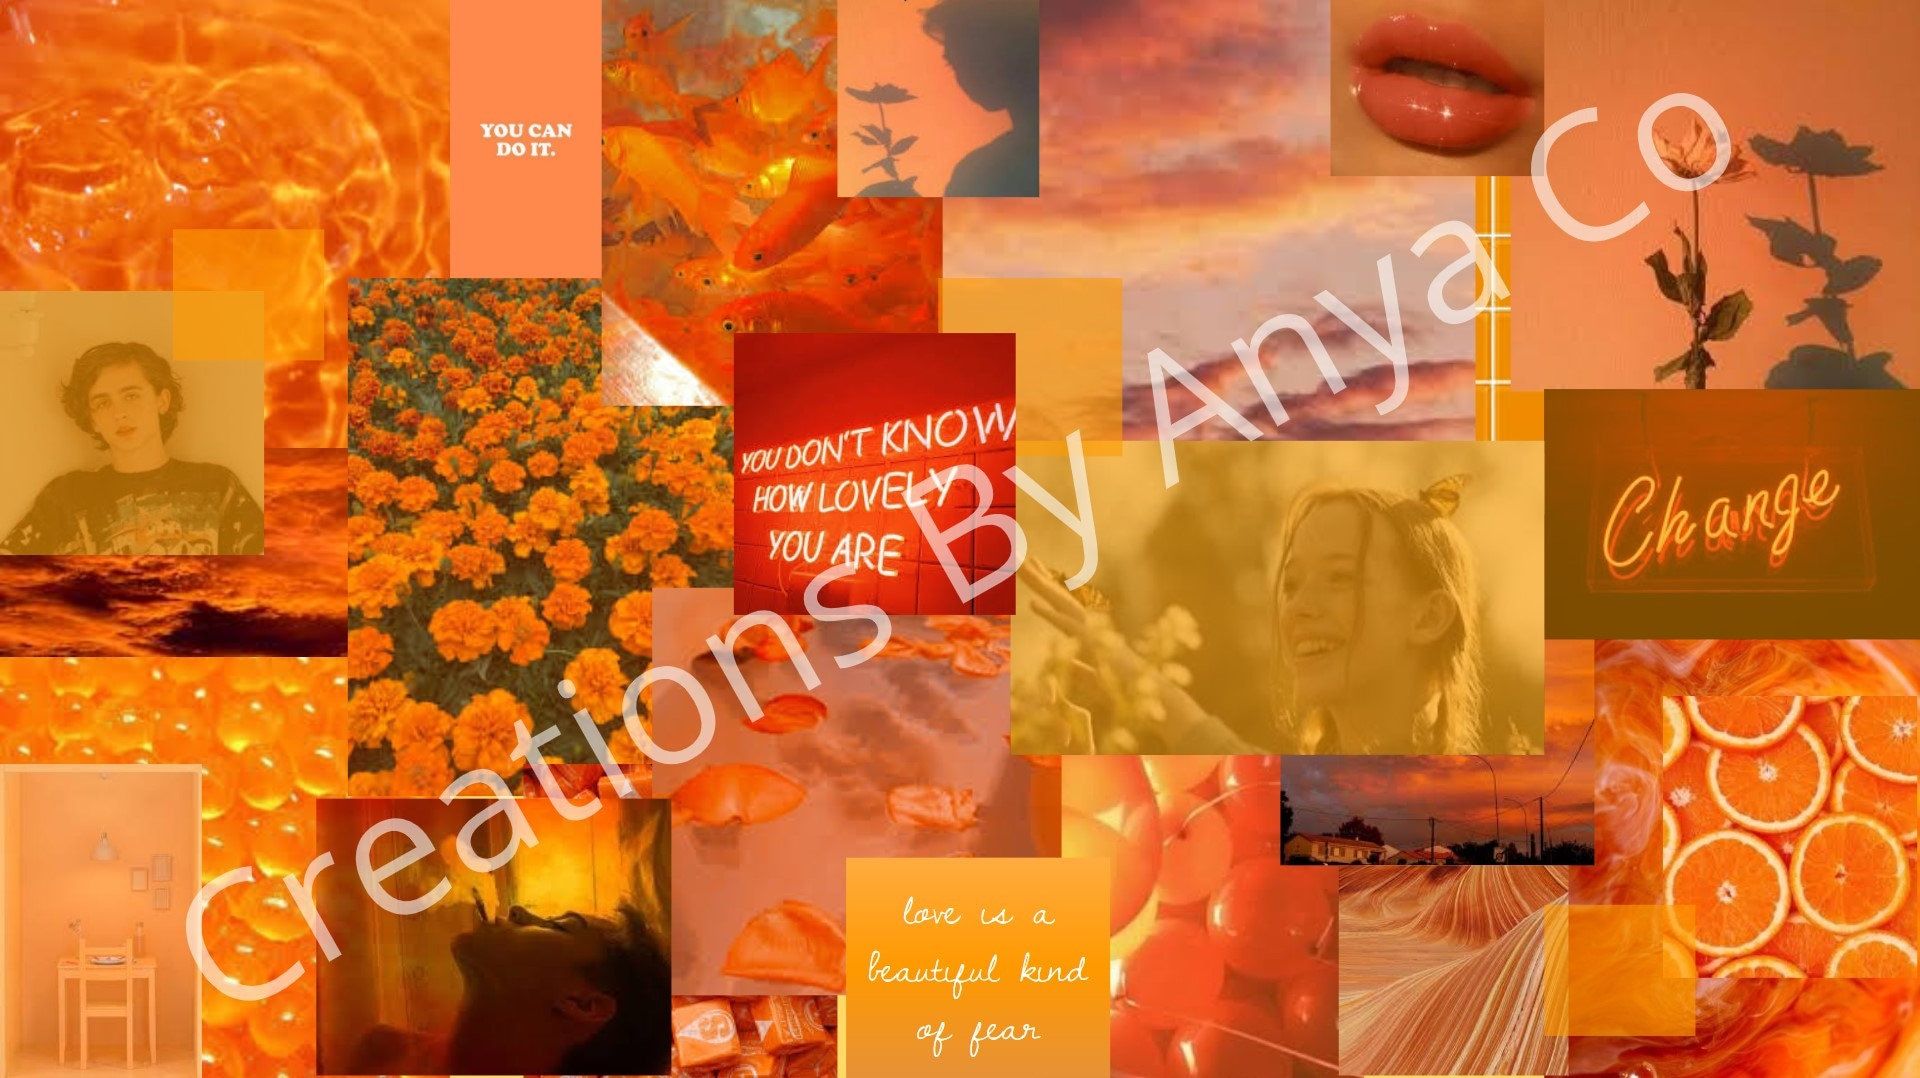 Collage of orange and yellow aesthetic images including flowers, lips, and the words 